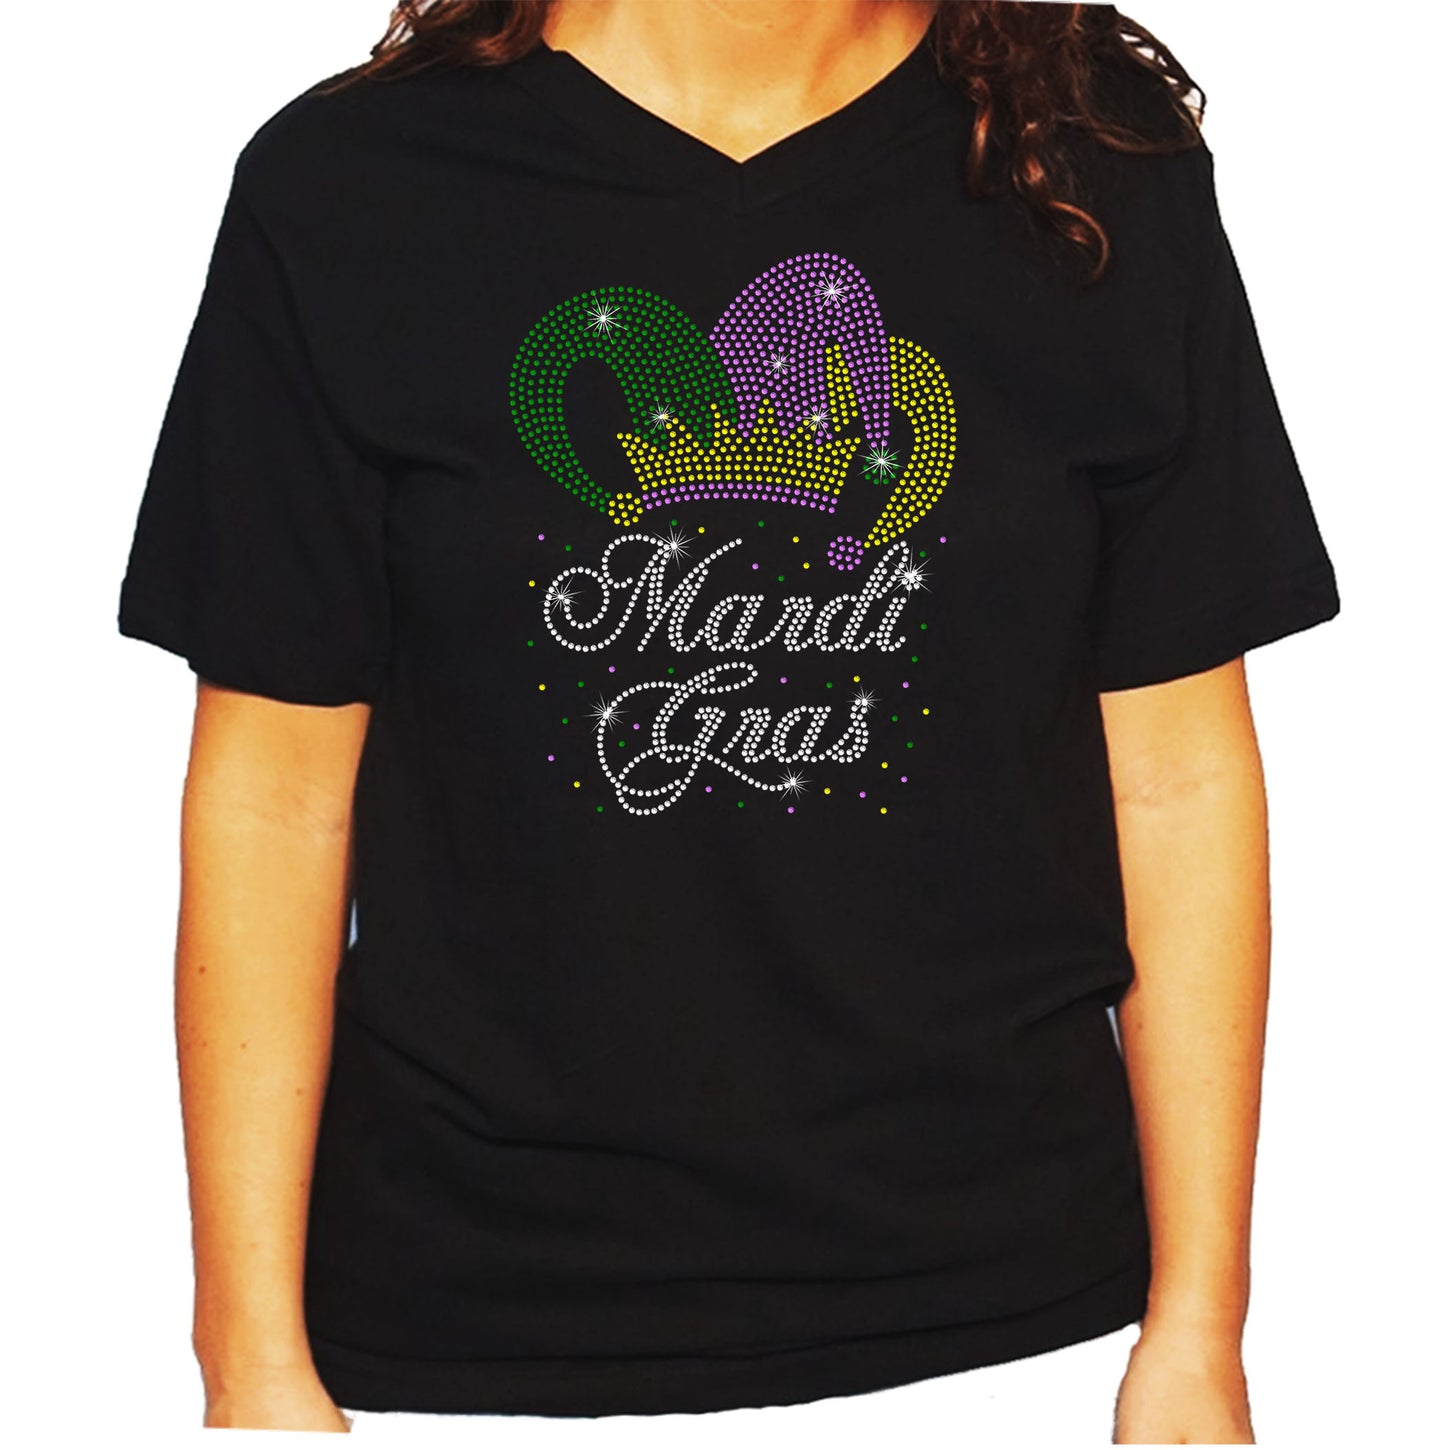 Women's/Unisex Rhinestone T-Shirt with Mardi Gras in Script with Jester Hat - Fat Tuesday